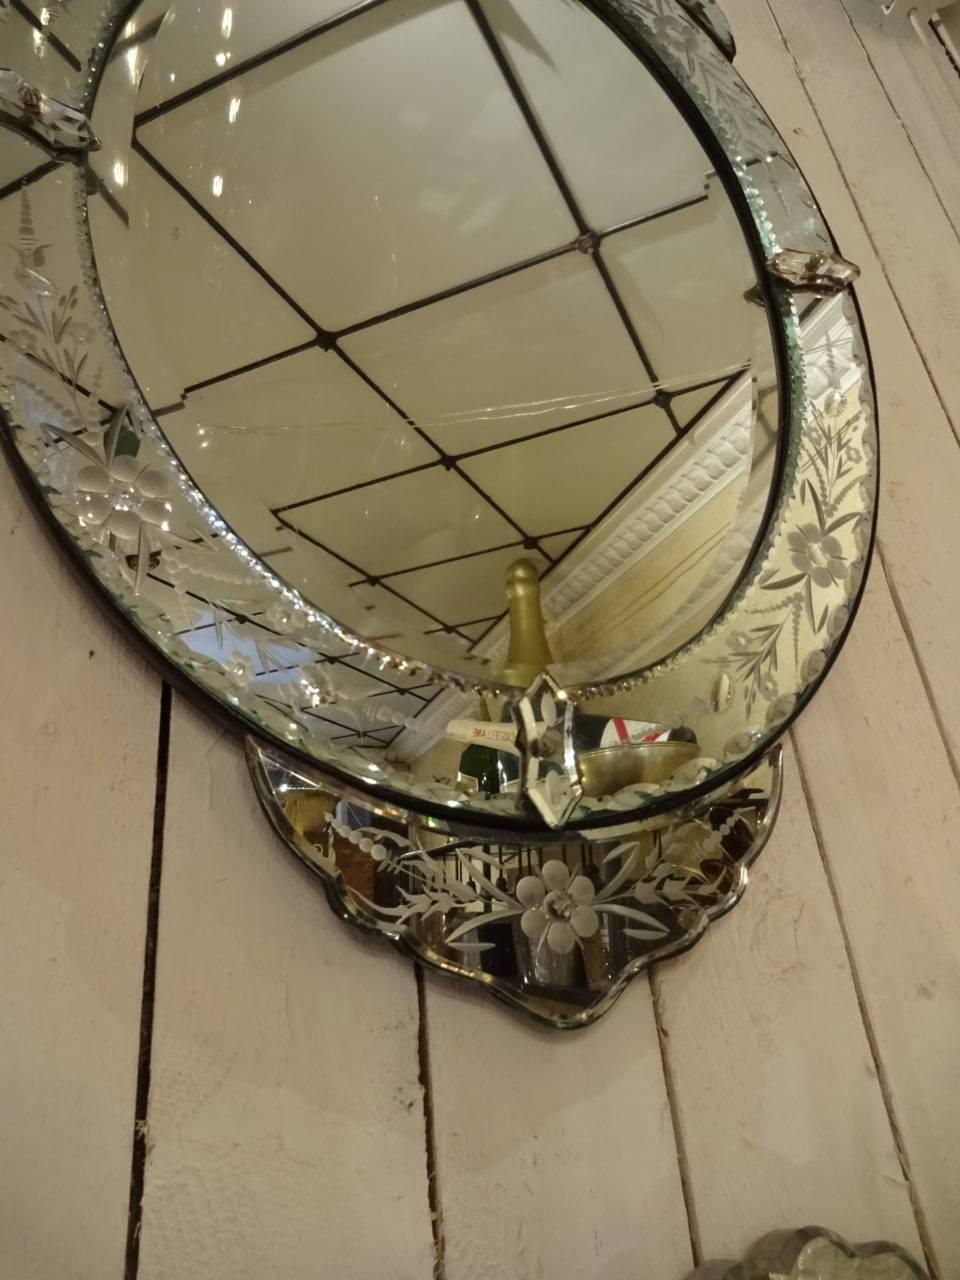 Gorgeous Venetian mirror from France, with fabulous cut mirrored glass and etchings. Pretty top of frame.